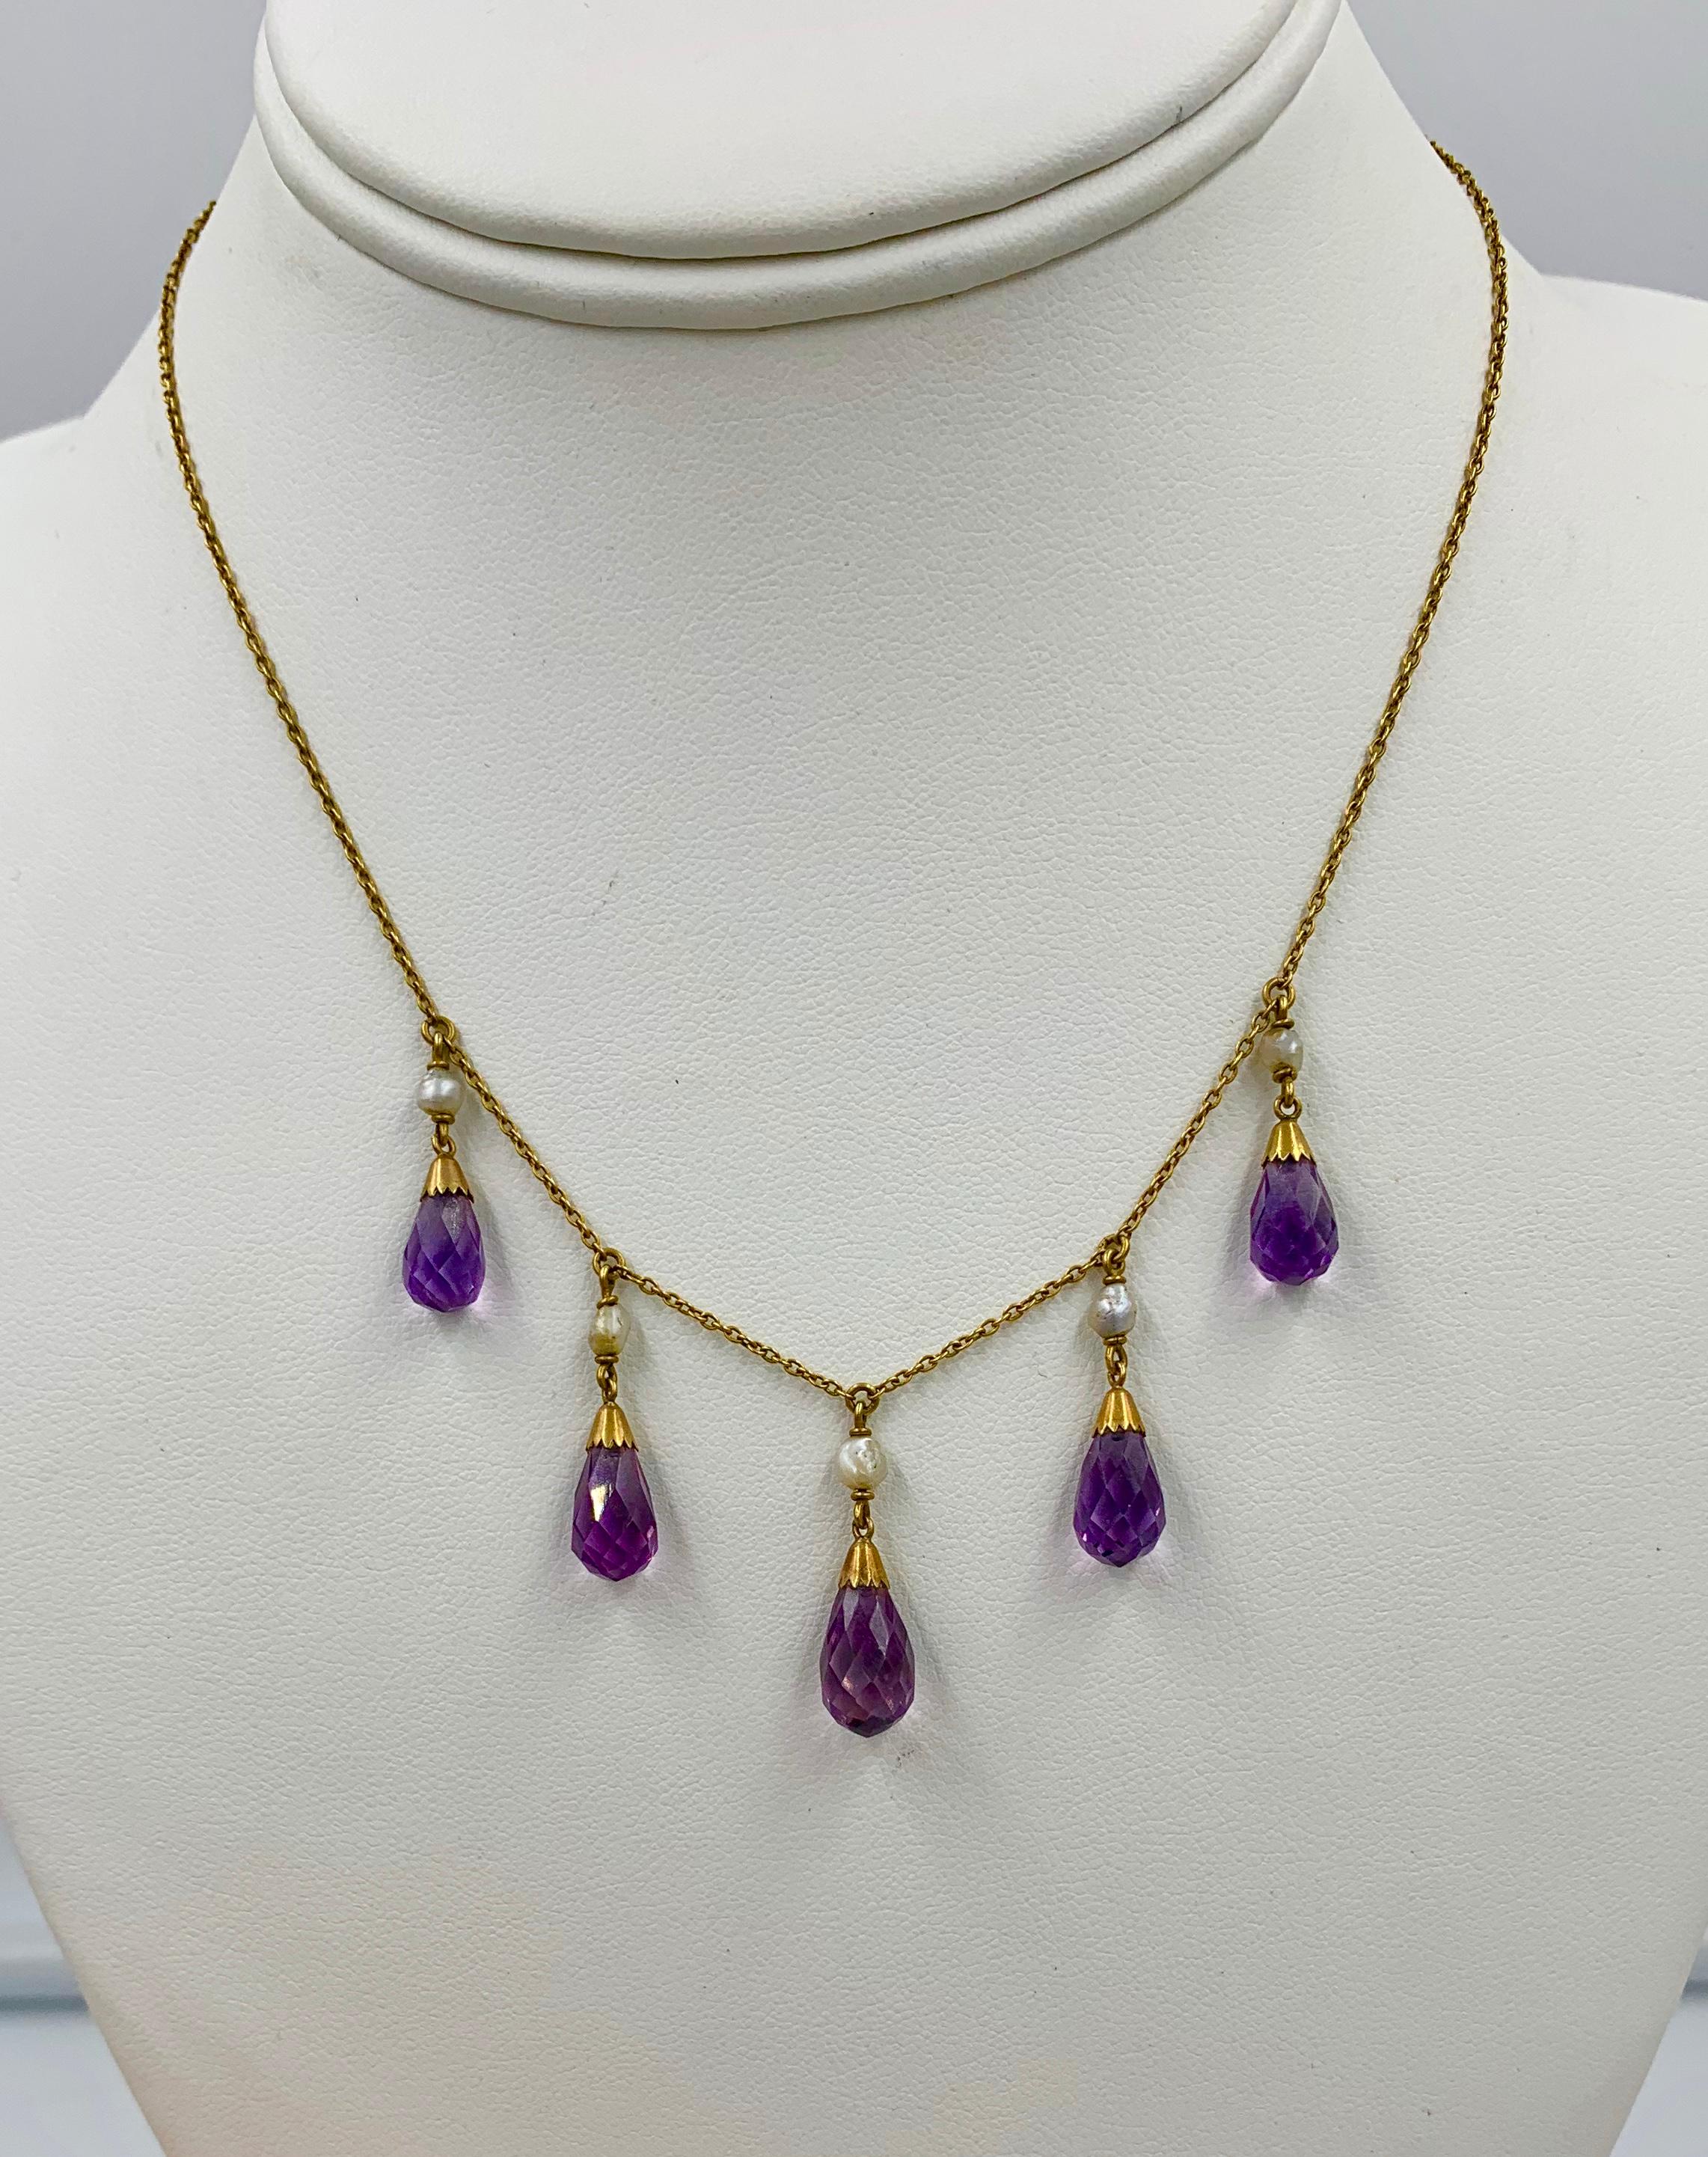 A stunning Victorian - Belle Epoque Amethyst Necklace with 5 gorgeous graduated Briolette Cut Amethysts set in a perfect 14 Karat Yellow Gold Necklace.  The Amethysts have the most wonderful purple color and the briolette cut of the gems brings out